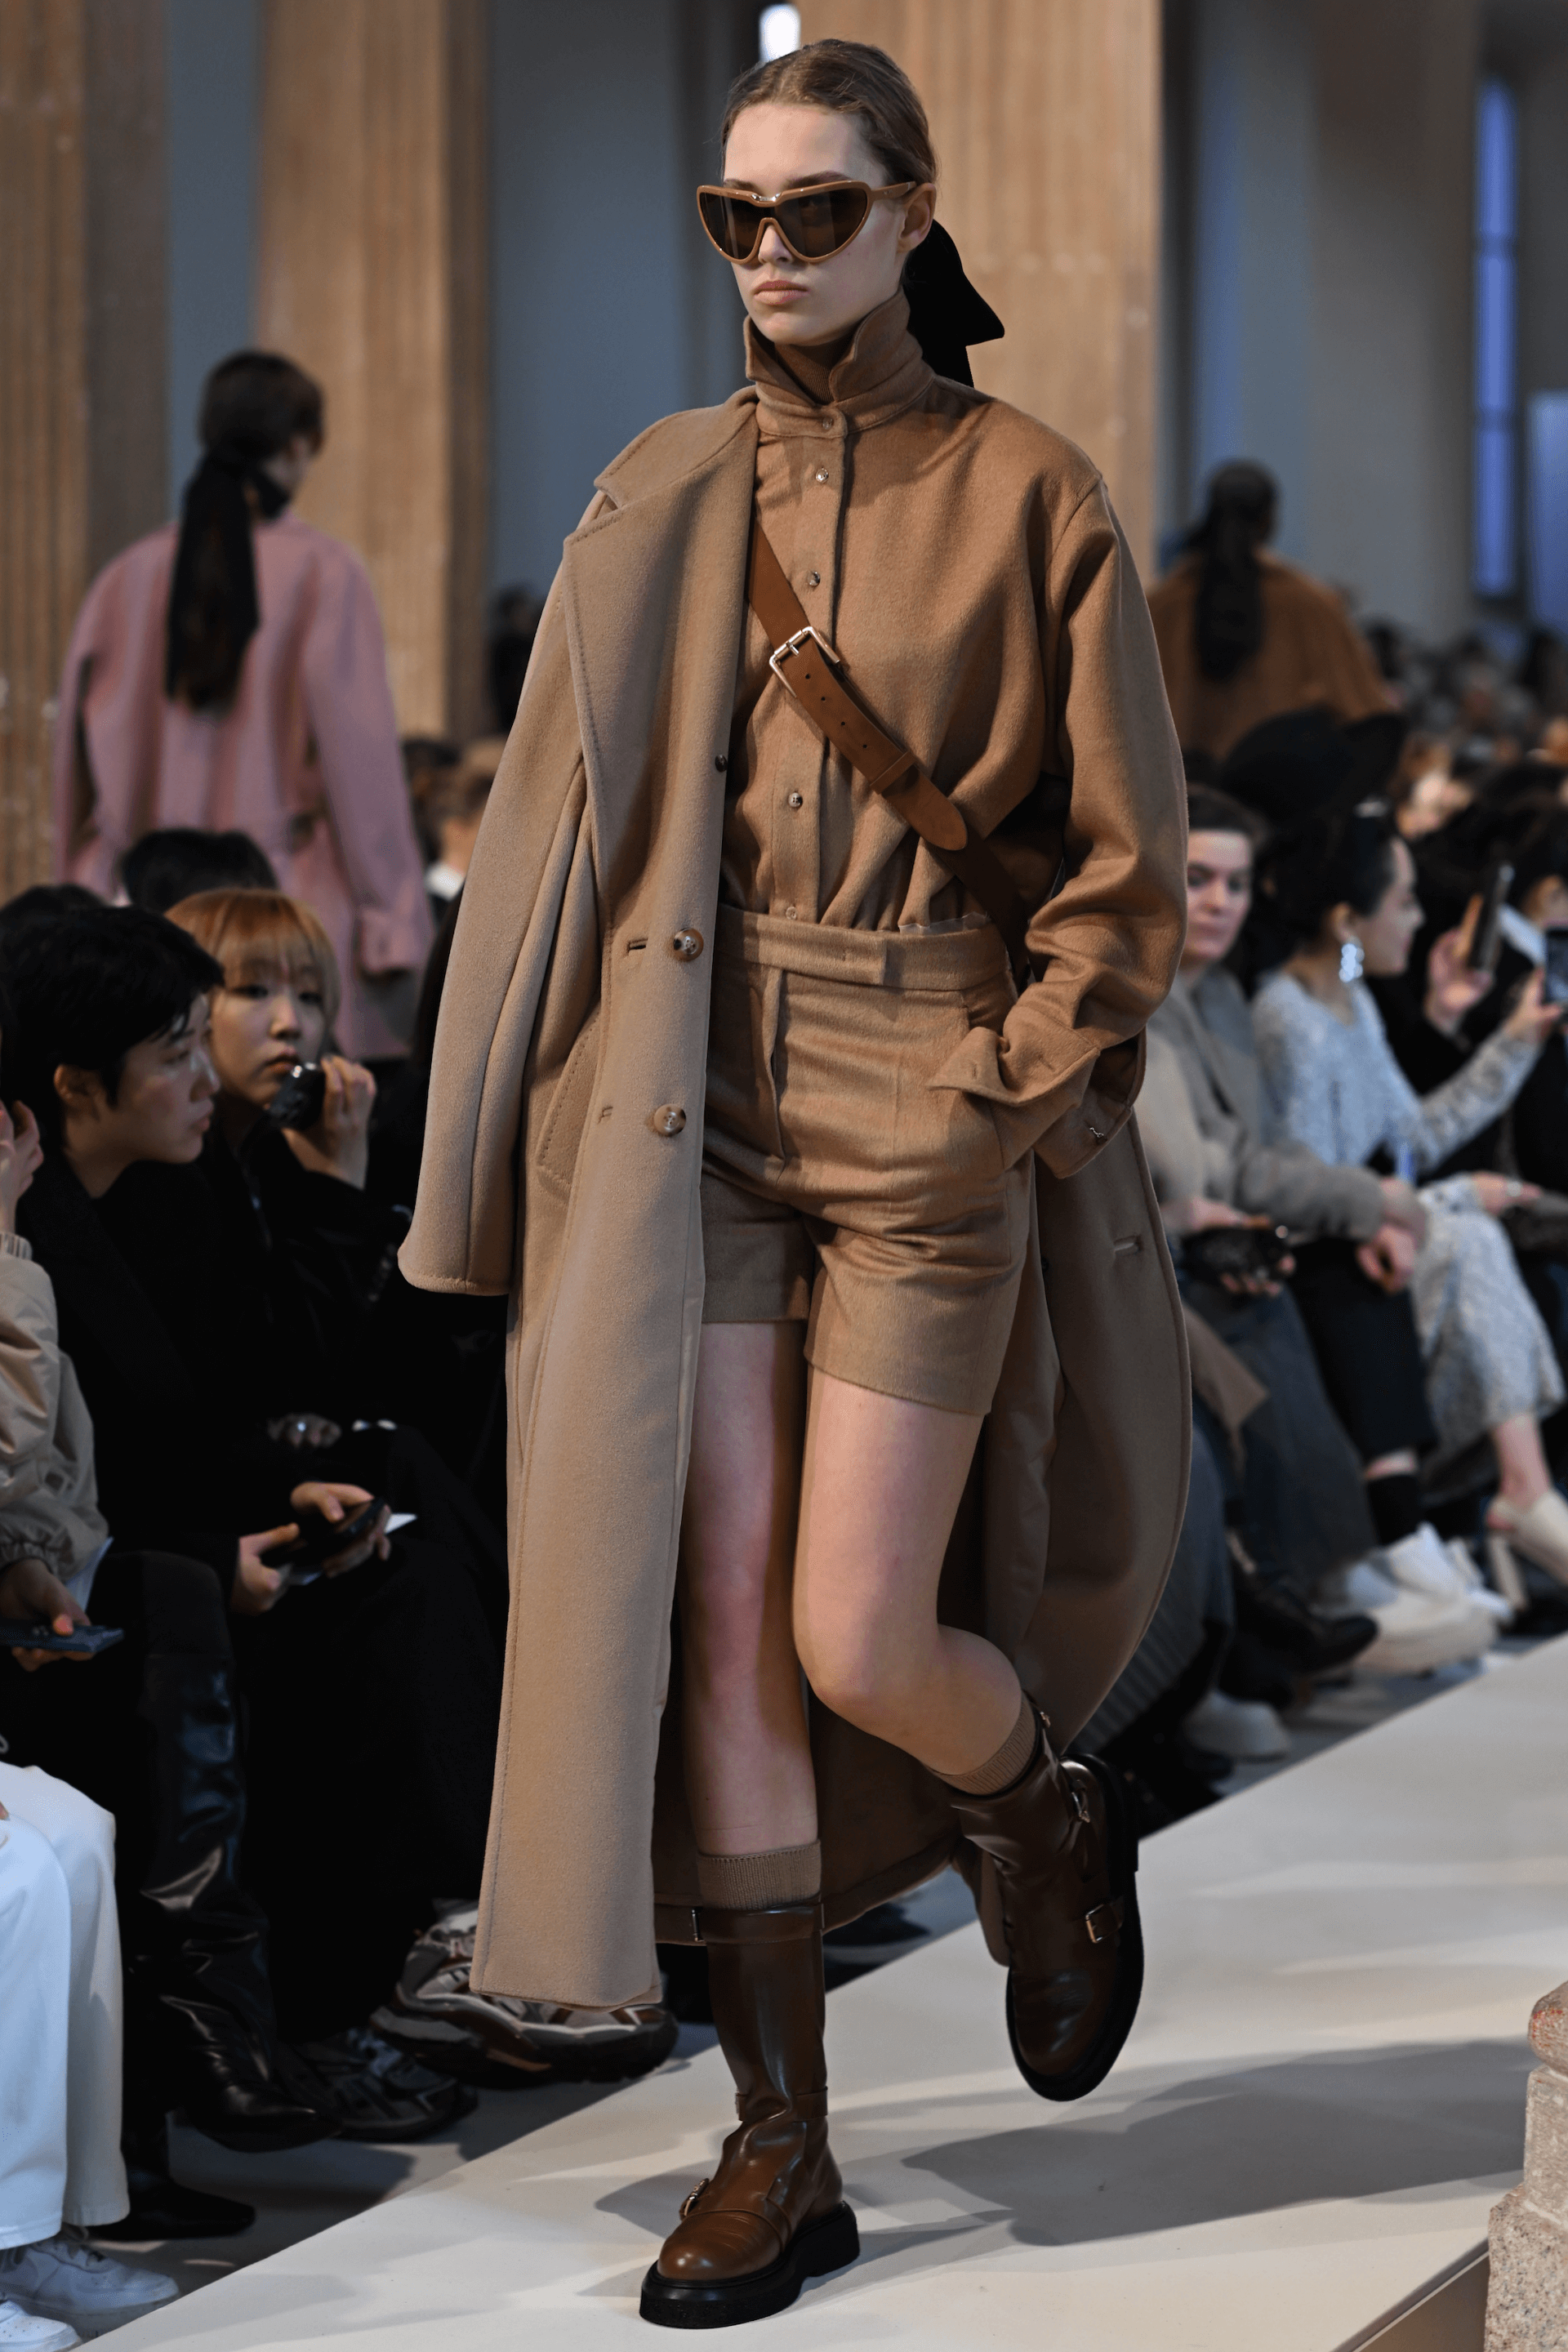 10 Top Fall/Winter 23/24 Trends Spotted on the Max Mara Runway